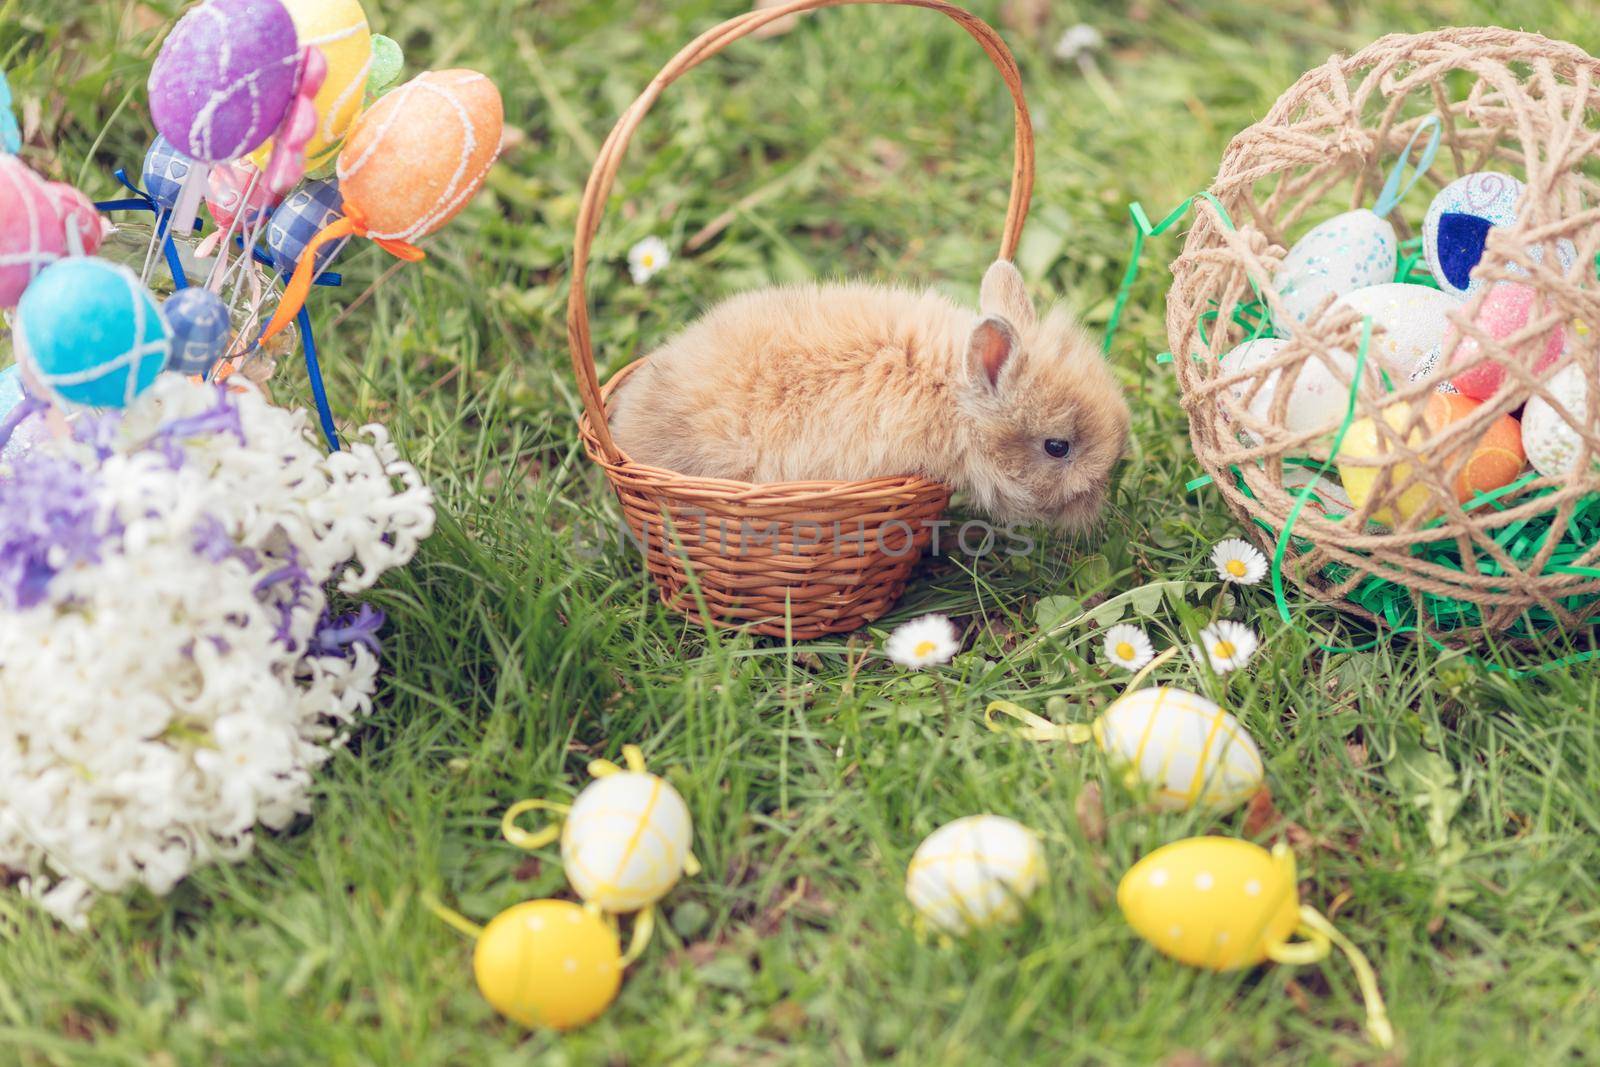 Cute little bunny sitting in the basket with Easter eggs and flowers hyacinth around in the spring green grass in holidays.